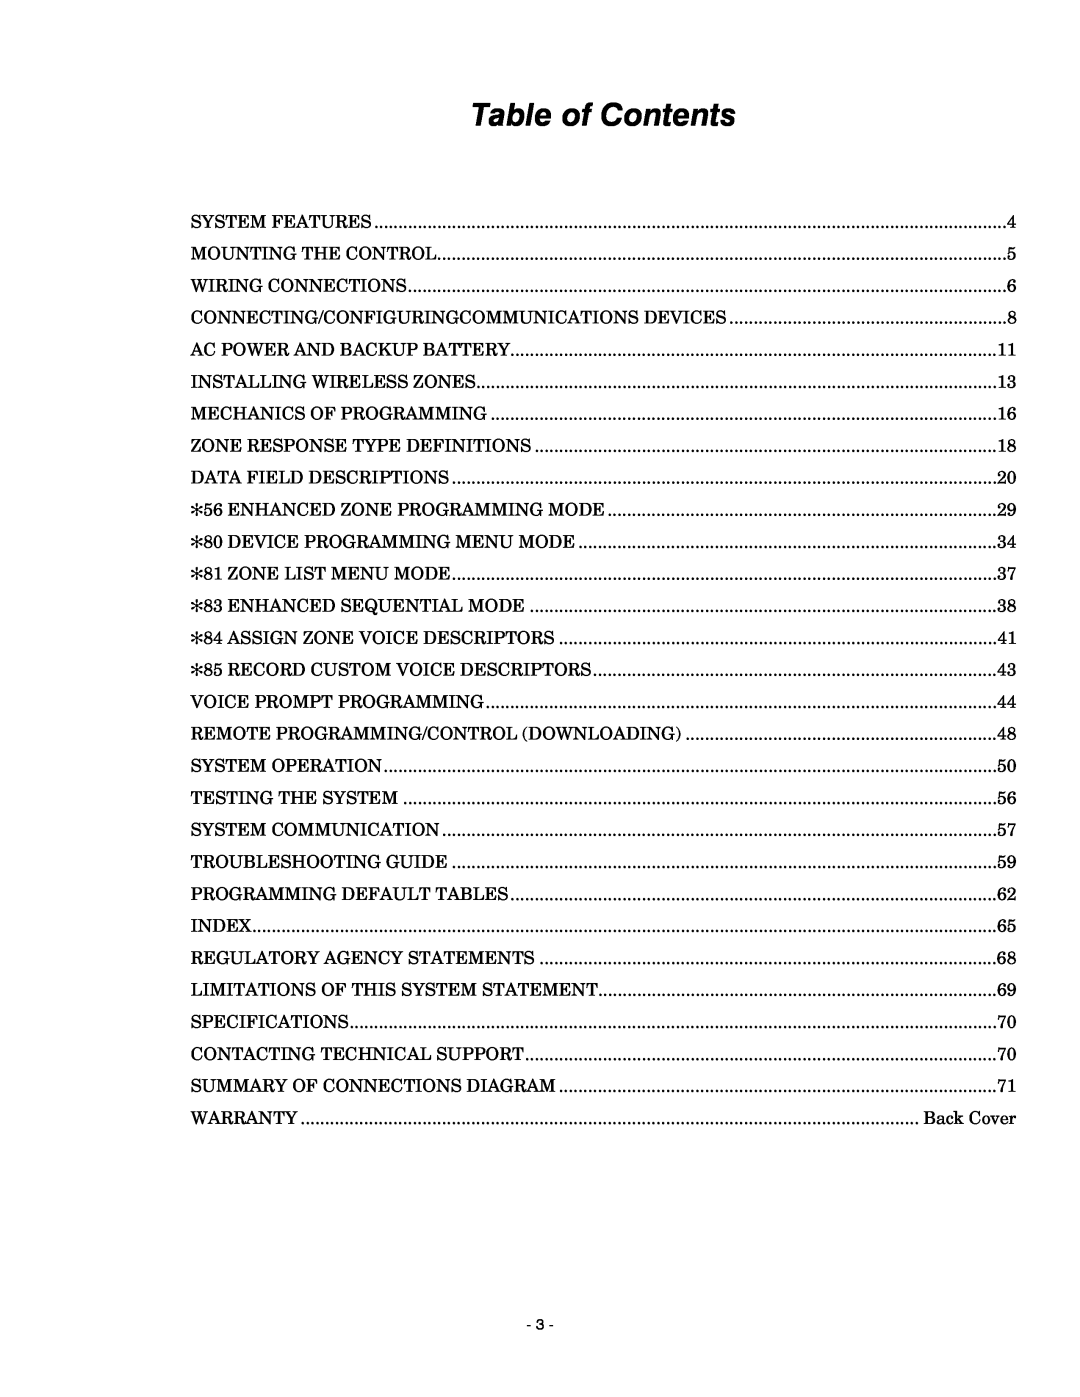 Honeywell K14114 3/06 Rev.B setup guide Table of Contents 